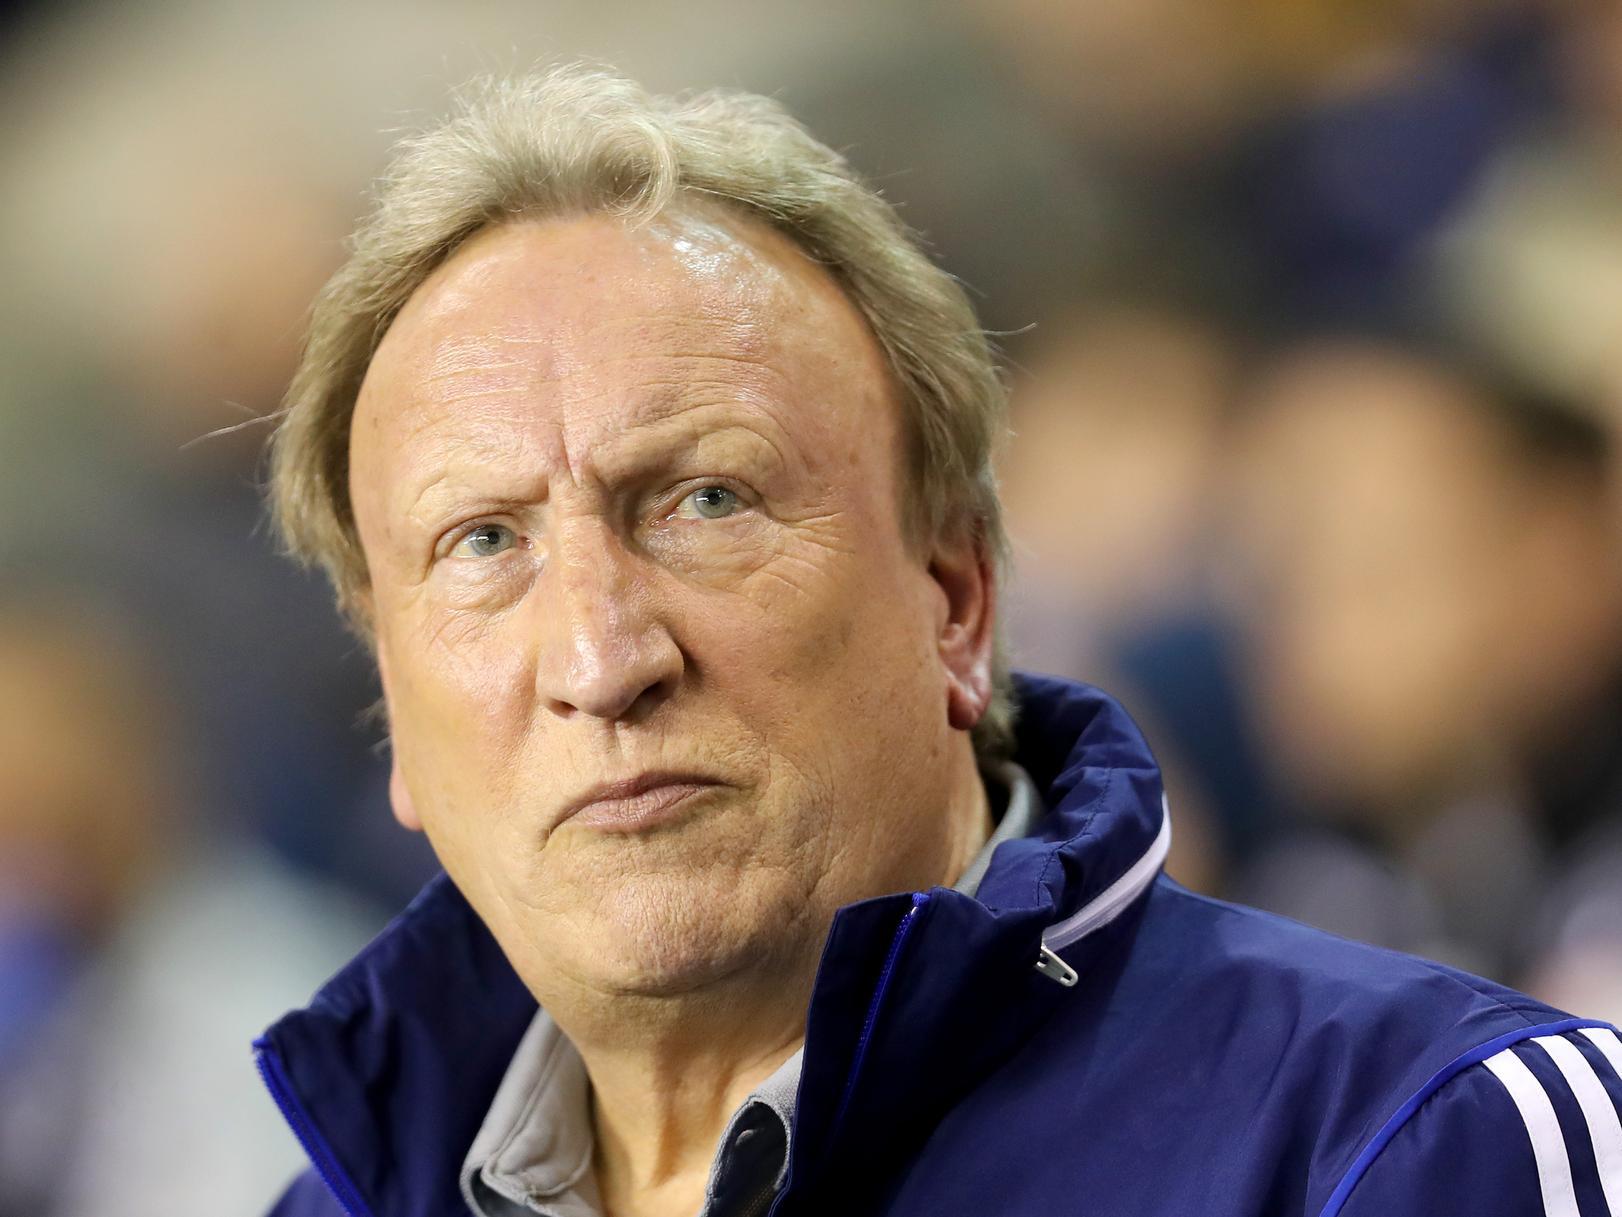 Cardiff City manager Neil Warnock has hit back at claims that his job is under threat, contending that the club are 'properly run', and that he's focusing merely on the next match. (Wales Online)